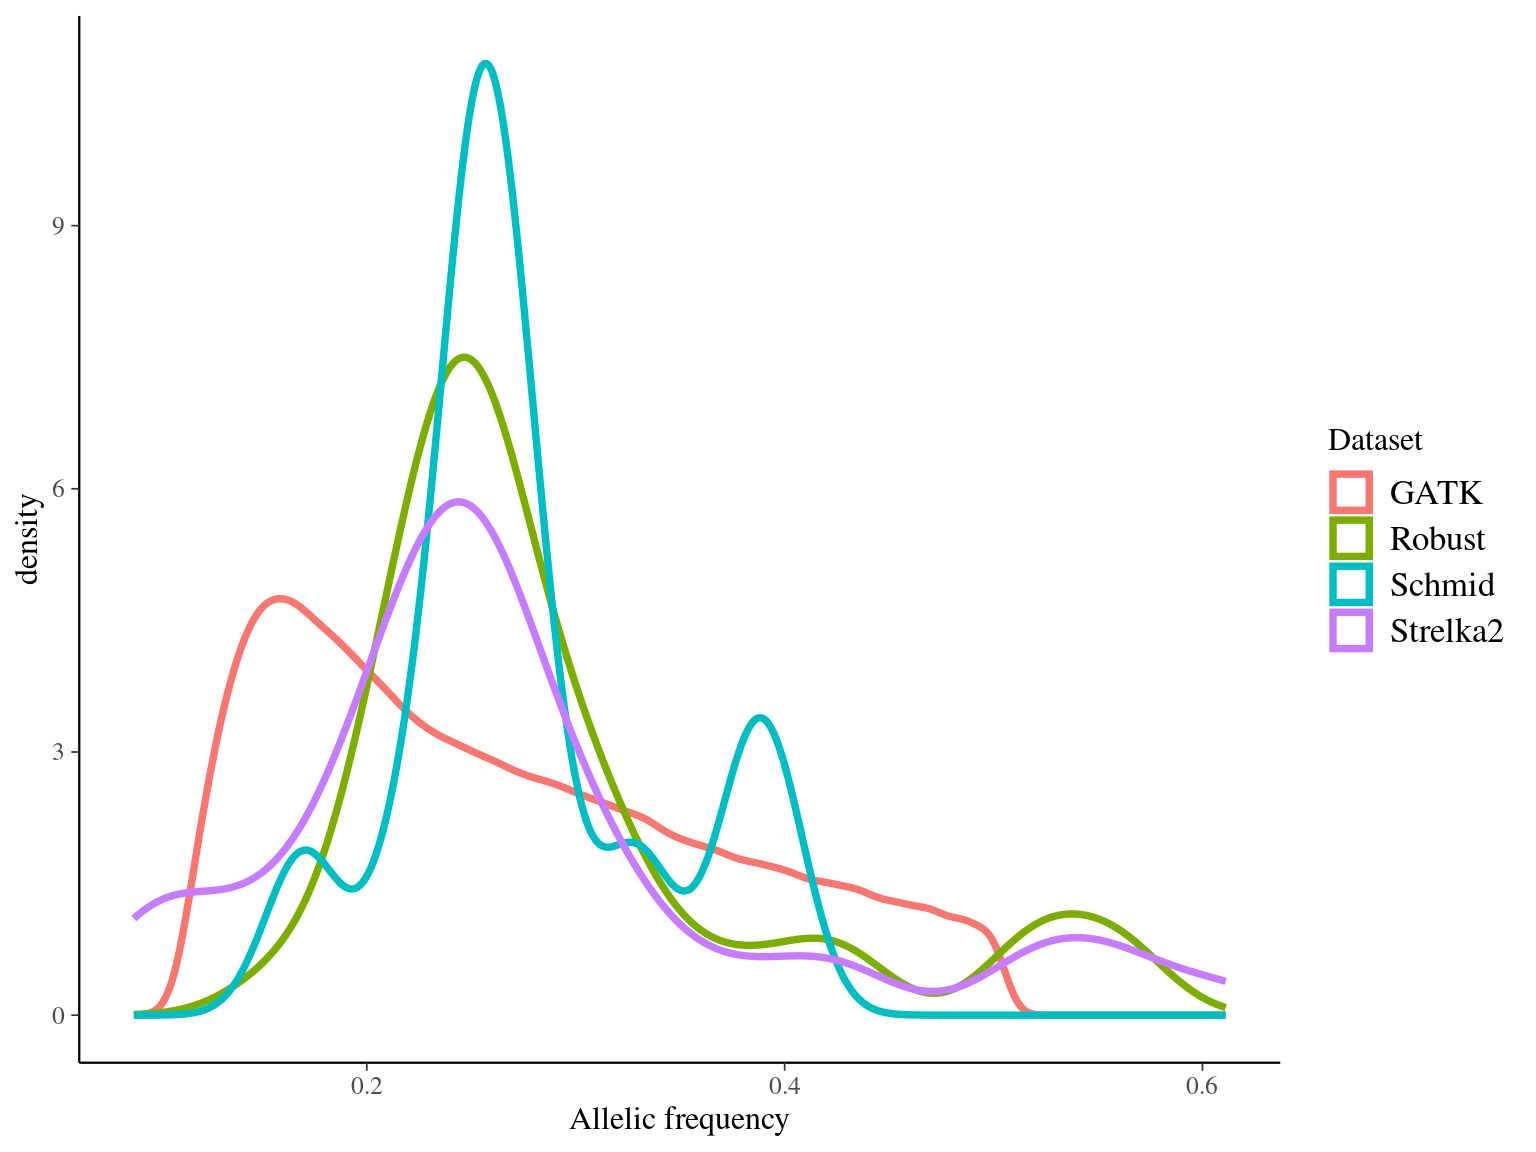 Allele frequency for the different datasets.